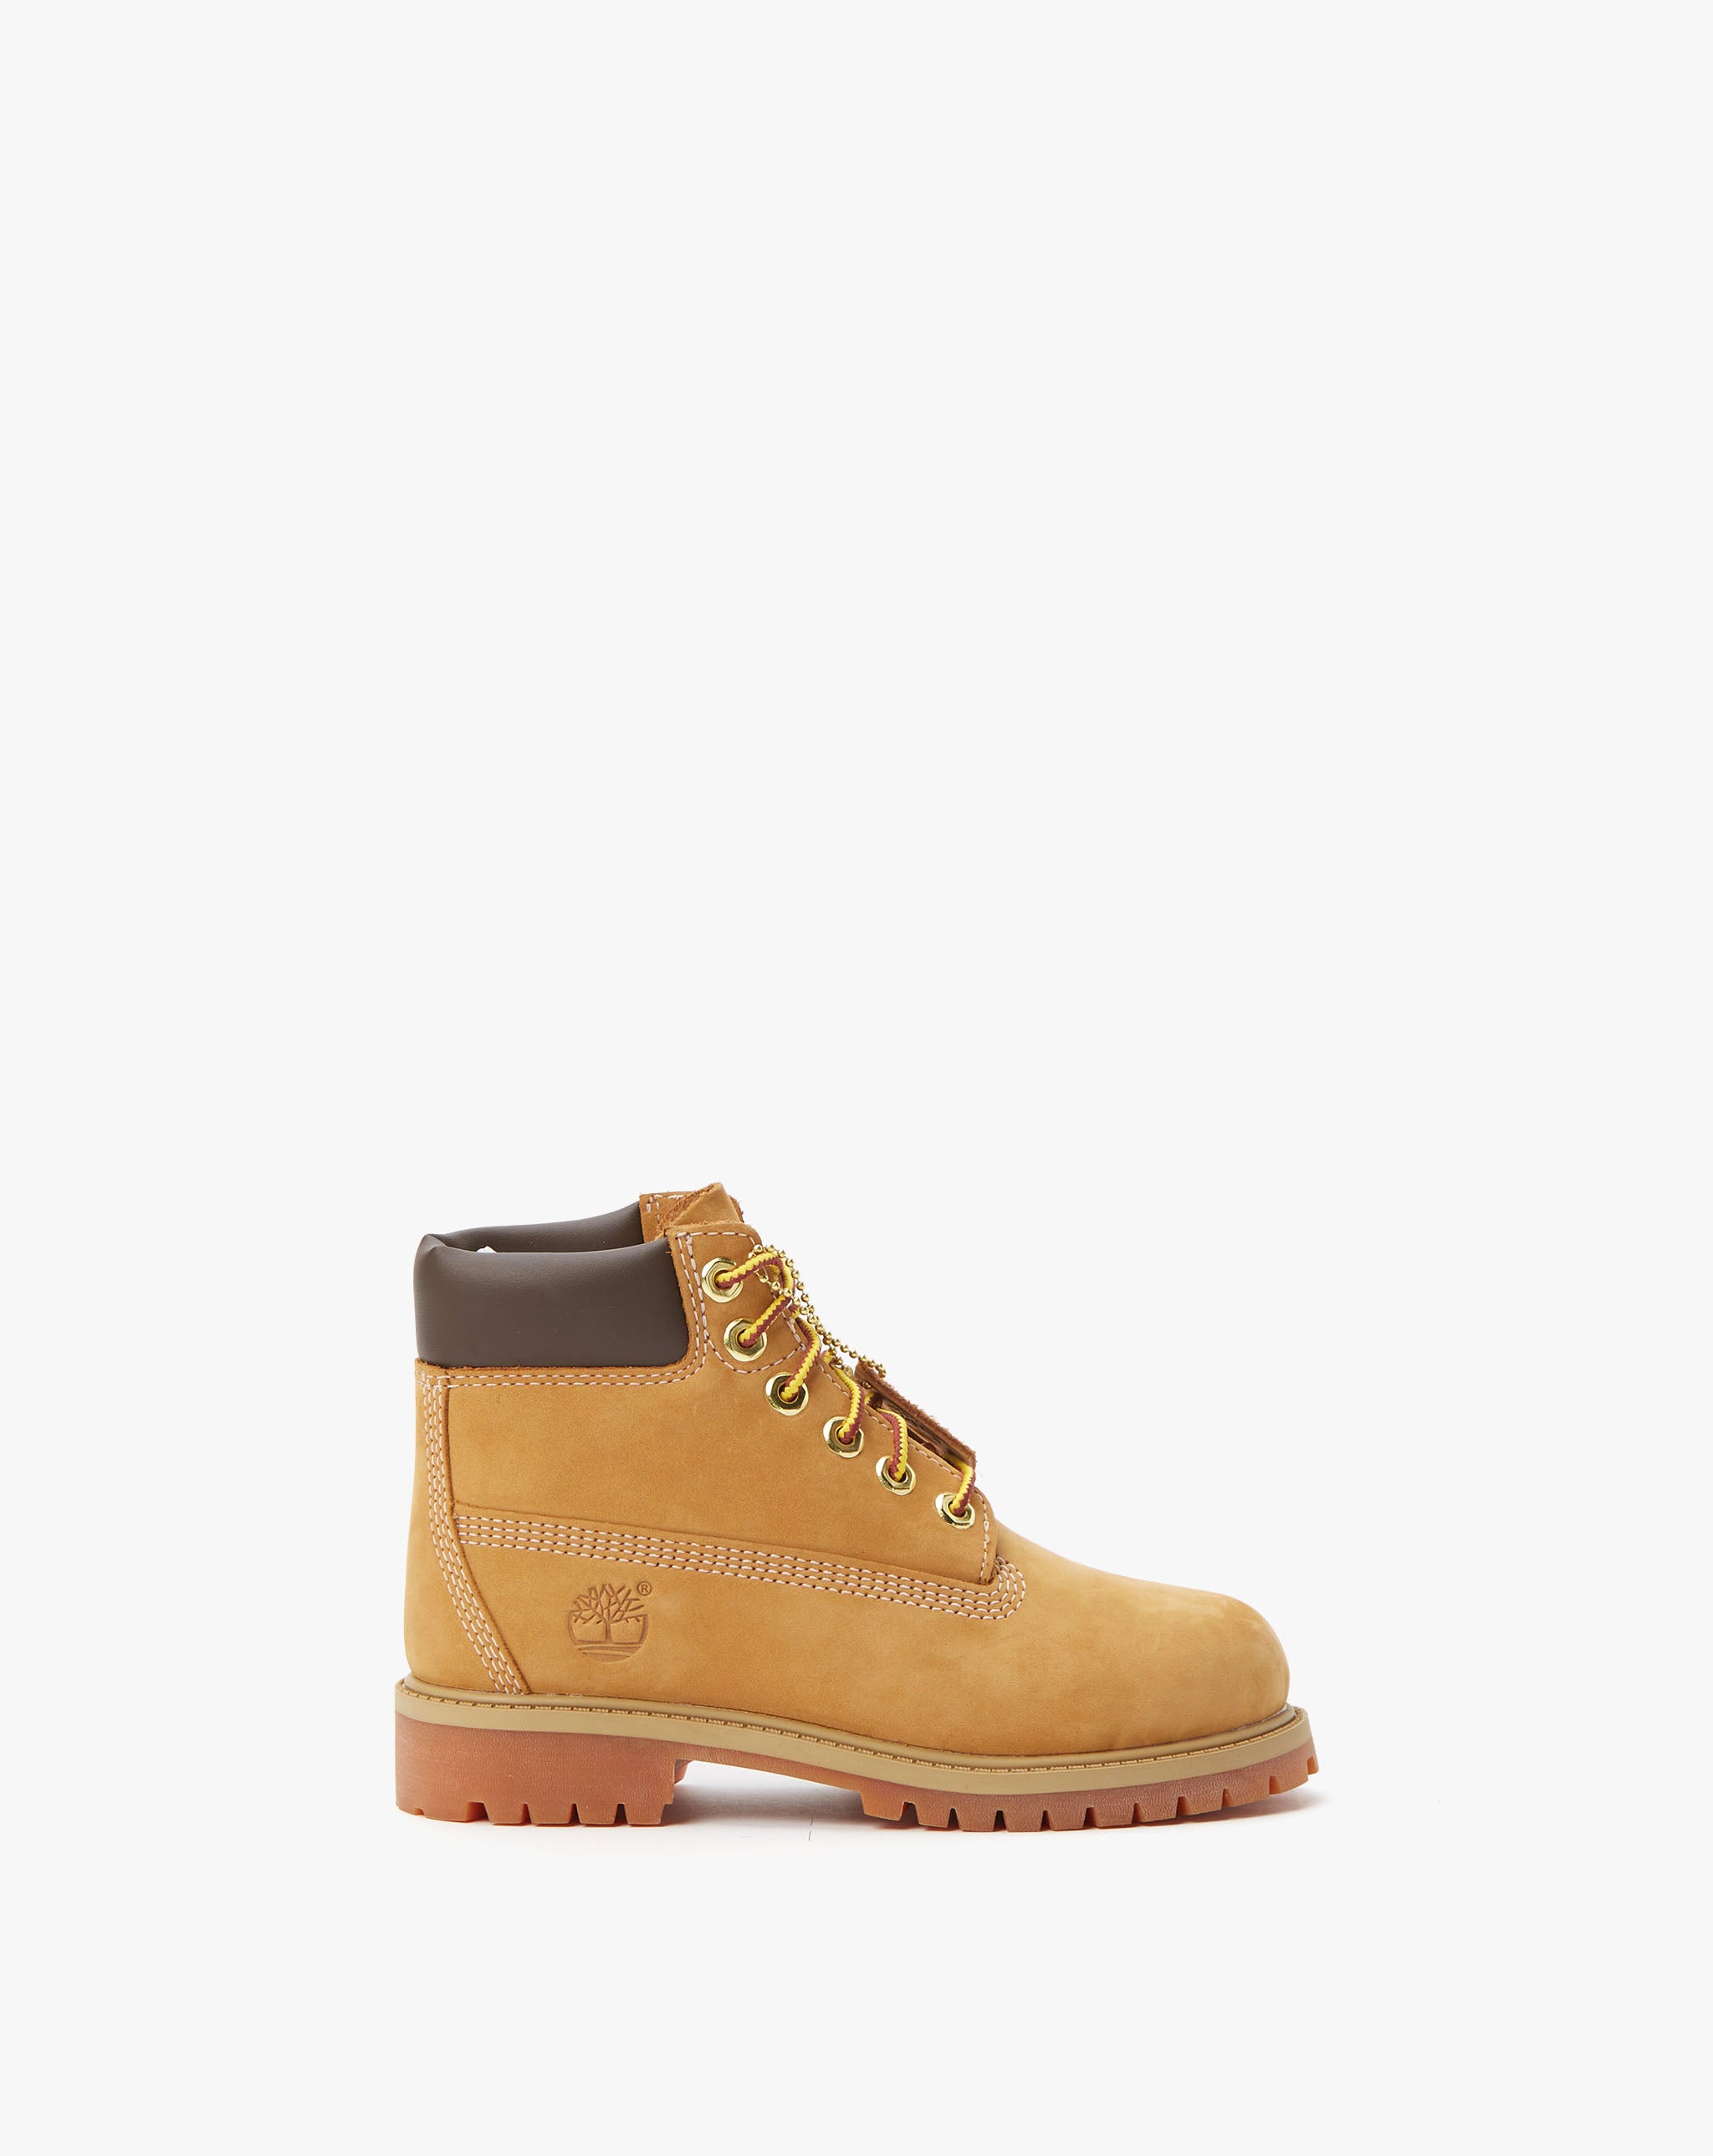 Timberland 6" Premium (Youth) - Rule of Next Footwear